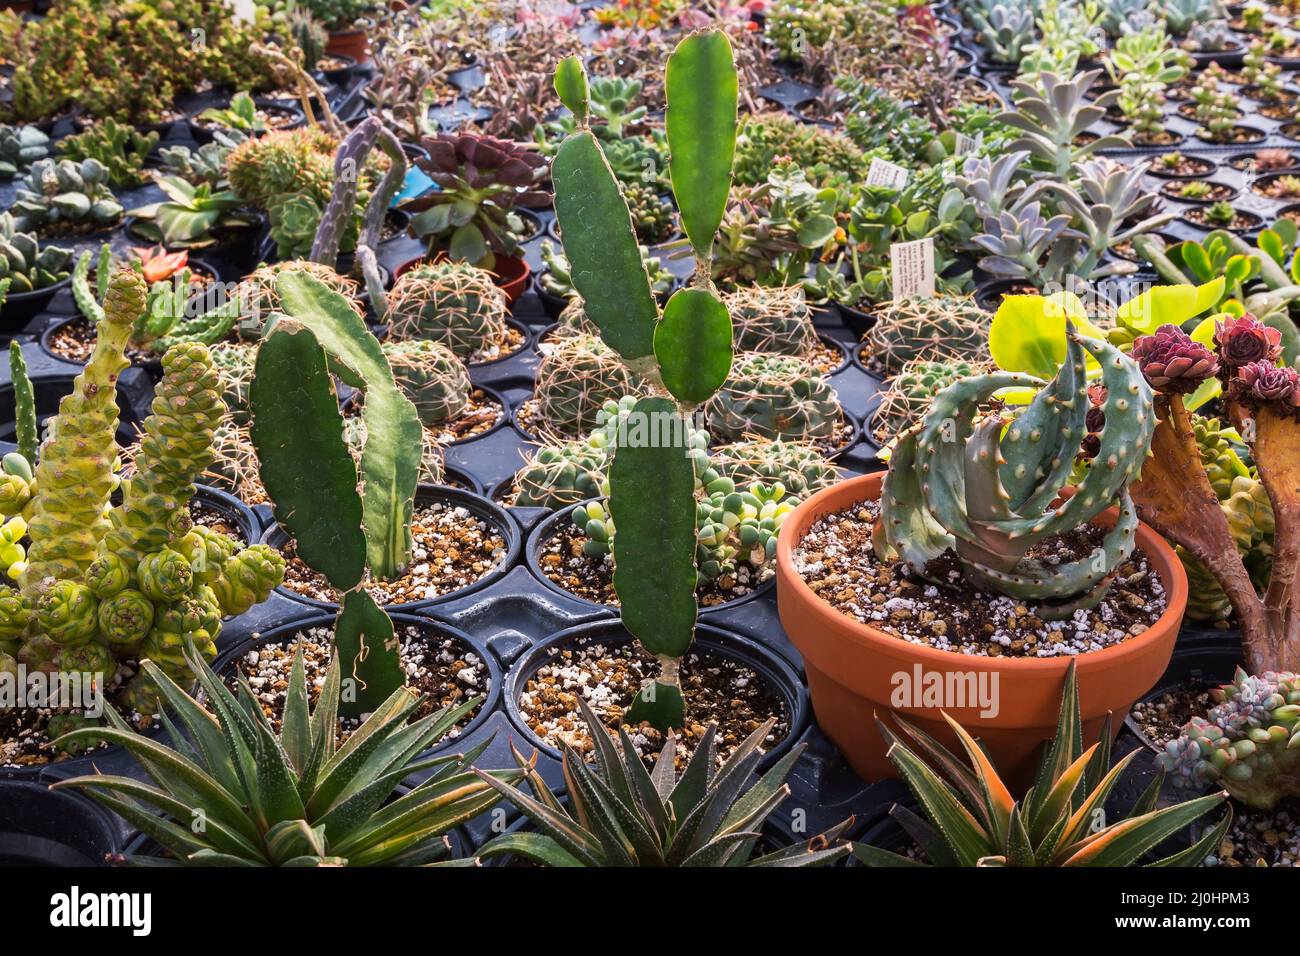 Mixed cacti and succulent plants including Monadenium ritchiei var. 'Yellow' growing in containers inside commercial greenhouse. Stock Photo